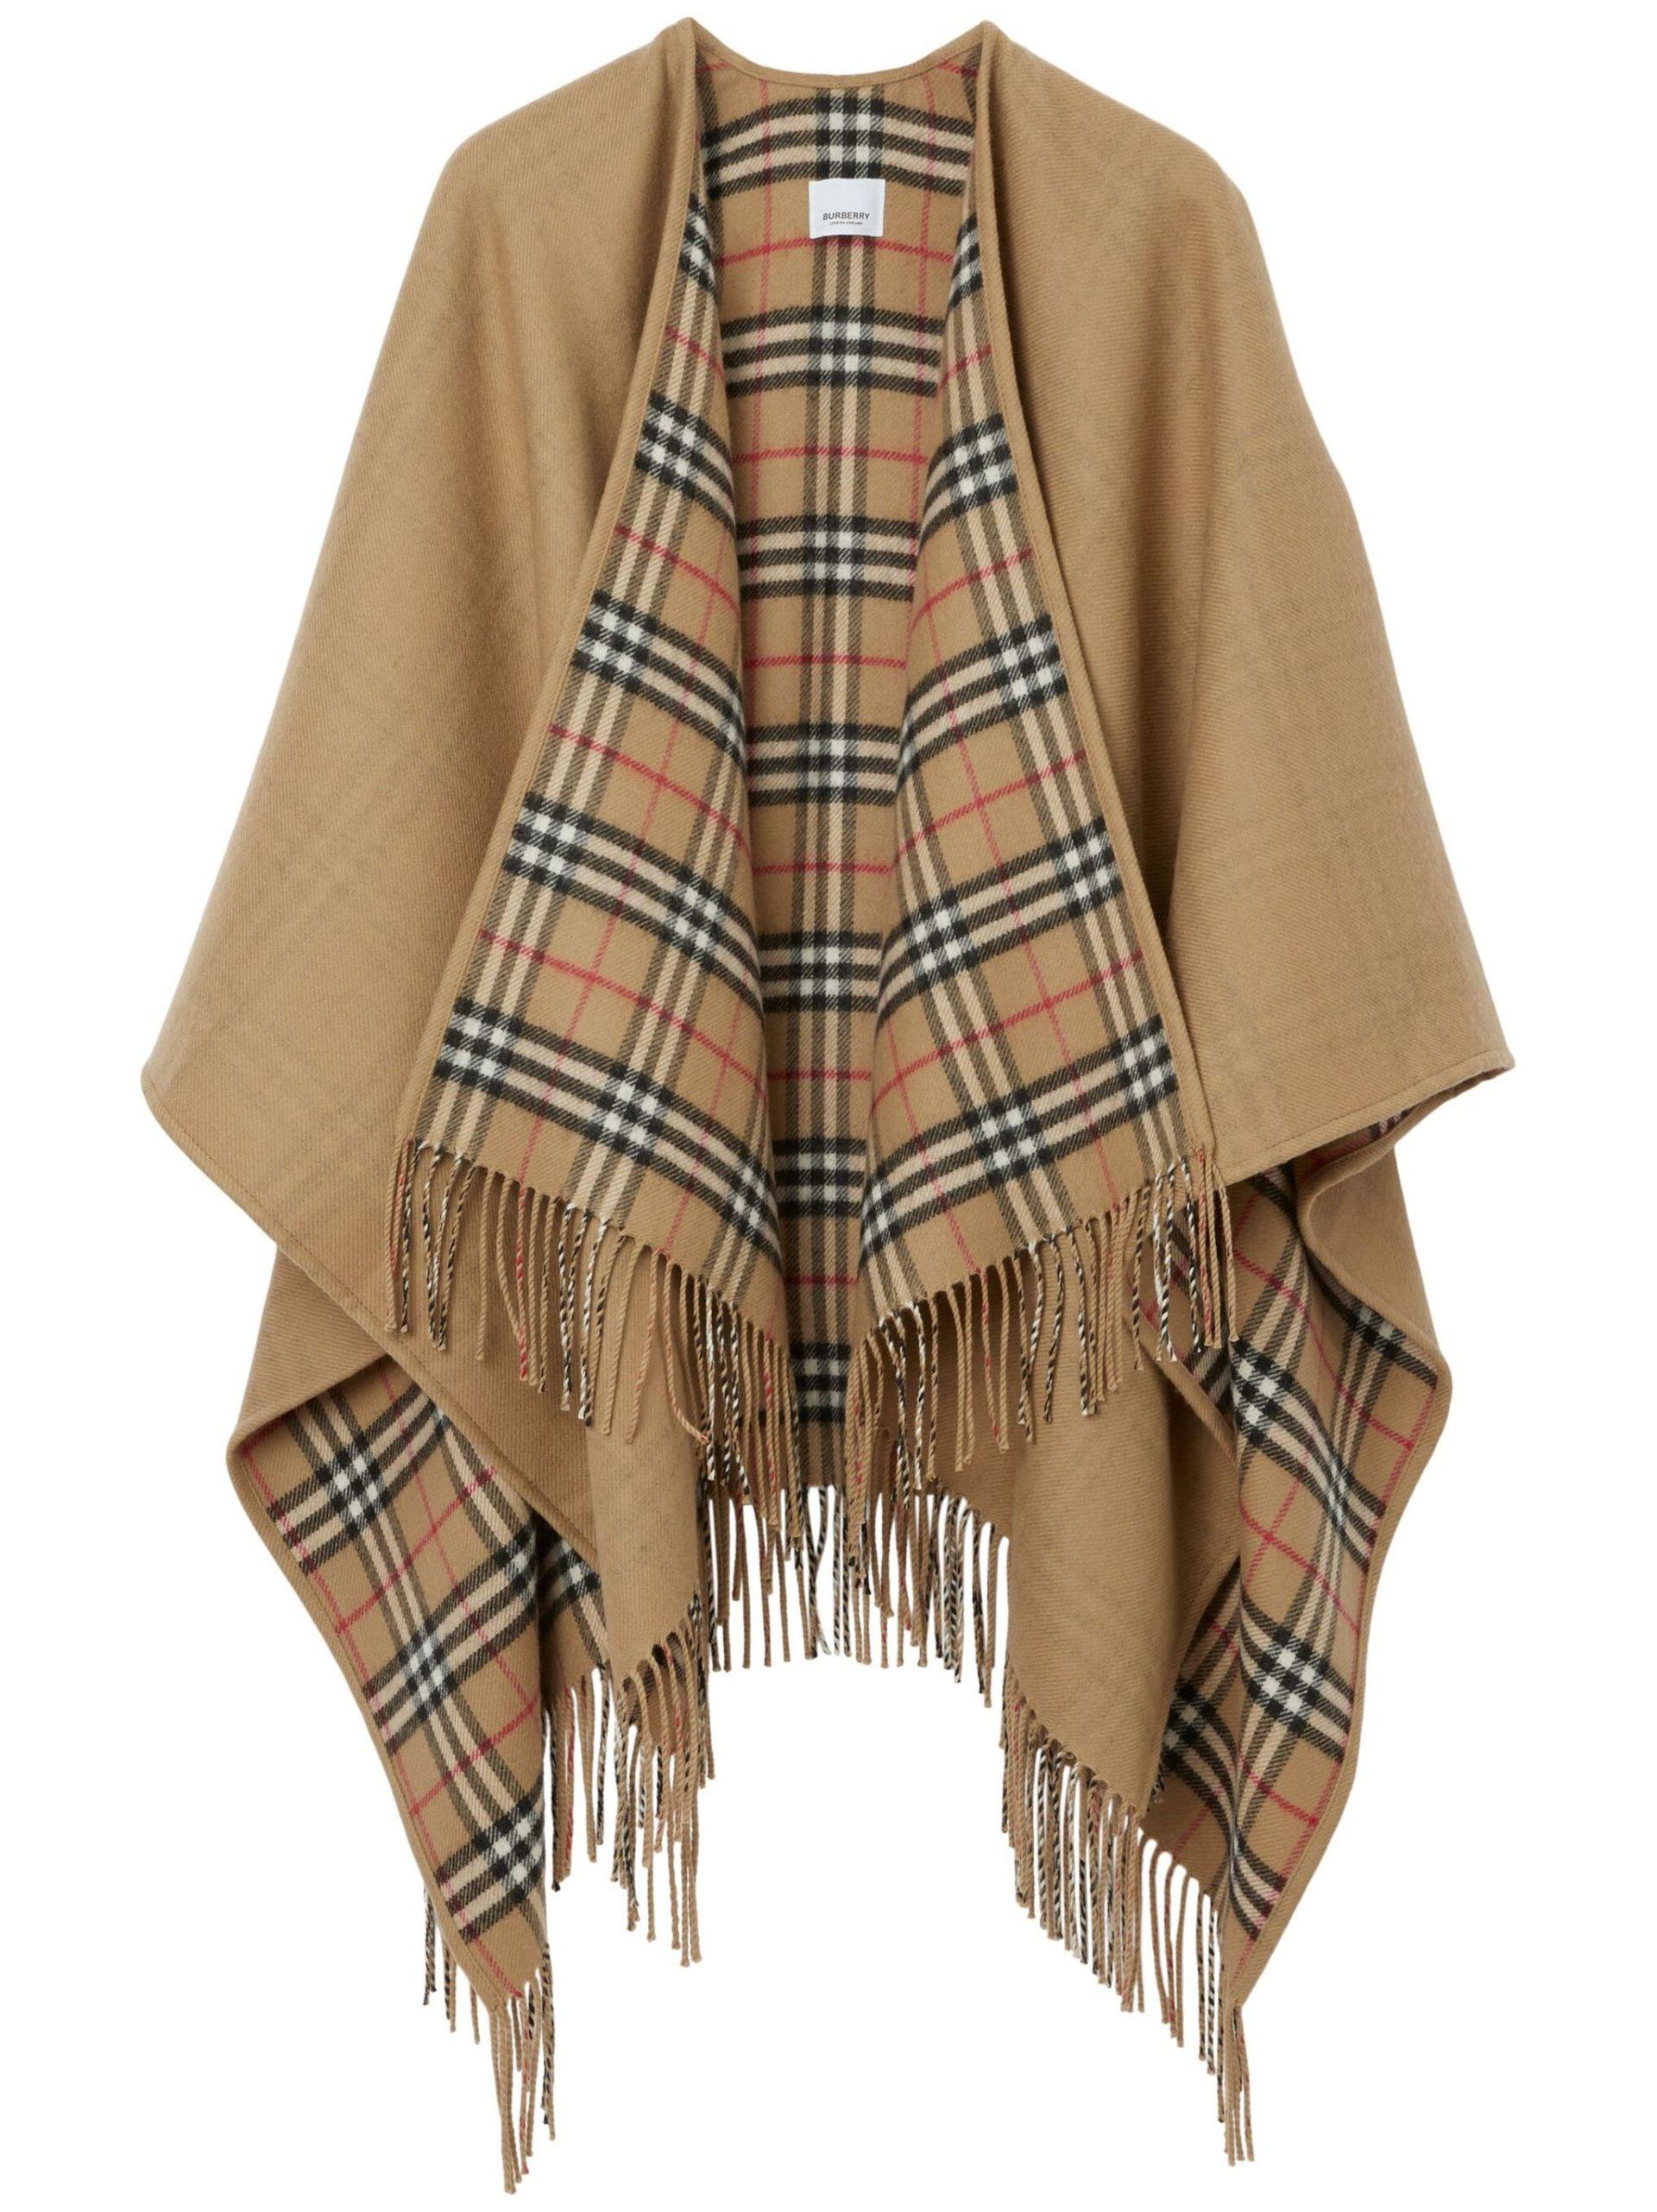 Burberry Vintage Check Reversible Wool Coat in Natural